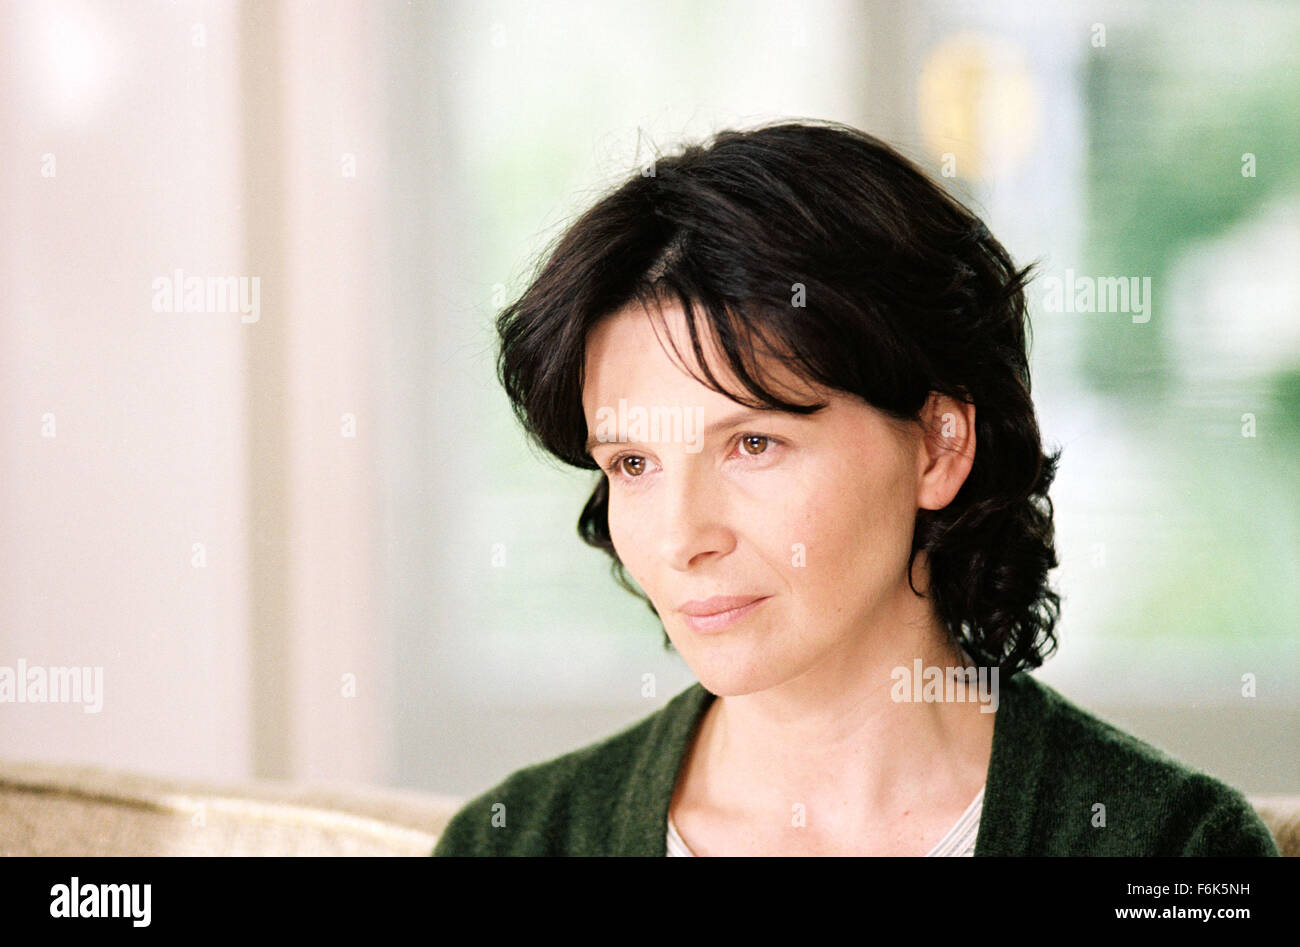 RELEASE DATE: September 3, 2005. MOVIE TITLE: Bee Season. STUDIO: Fox Searchlight. PLOT: A wife and mother begins a downward emotional spiral, as her husband avoids their collapsing marriage by immersing himself in his 11 year-old daughter's quest to become a spelling bee champion. PICTURED: JULIETTE BINOCHE stars as Miriam Neumann. Stock Photo